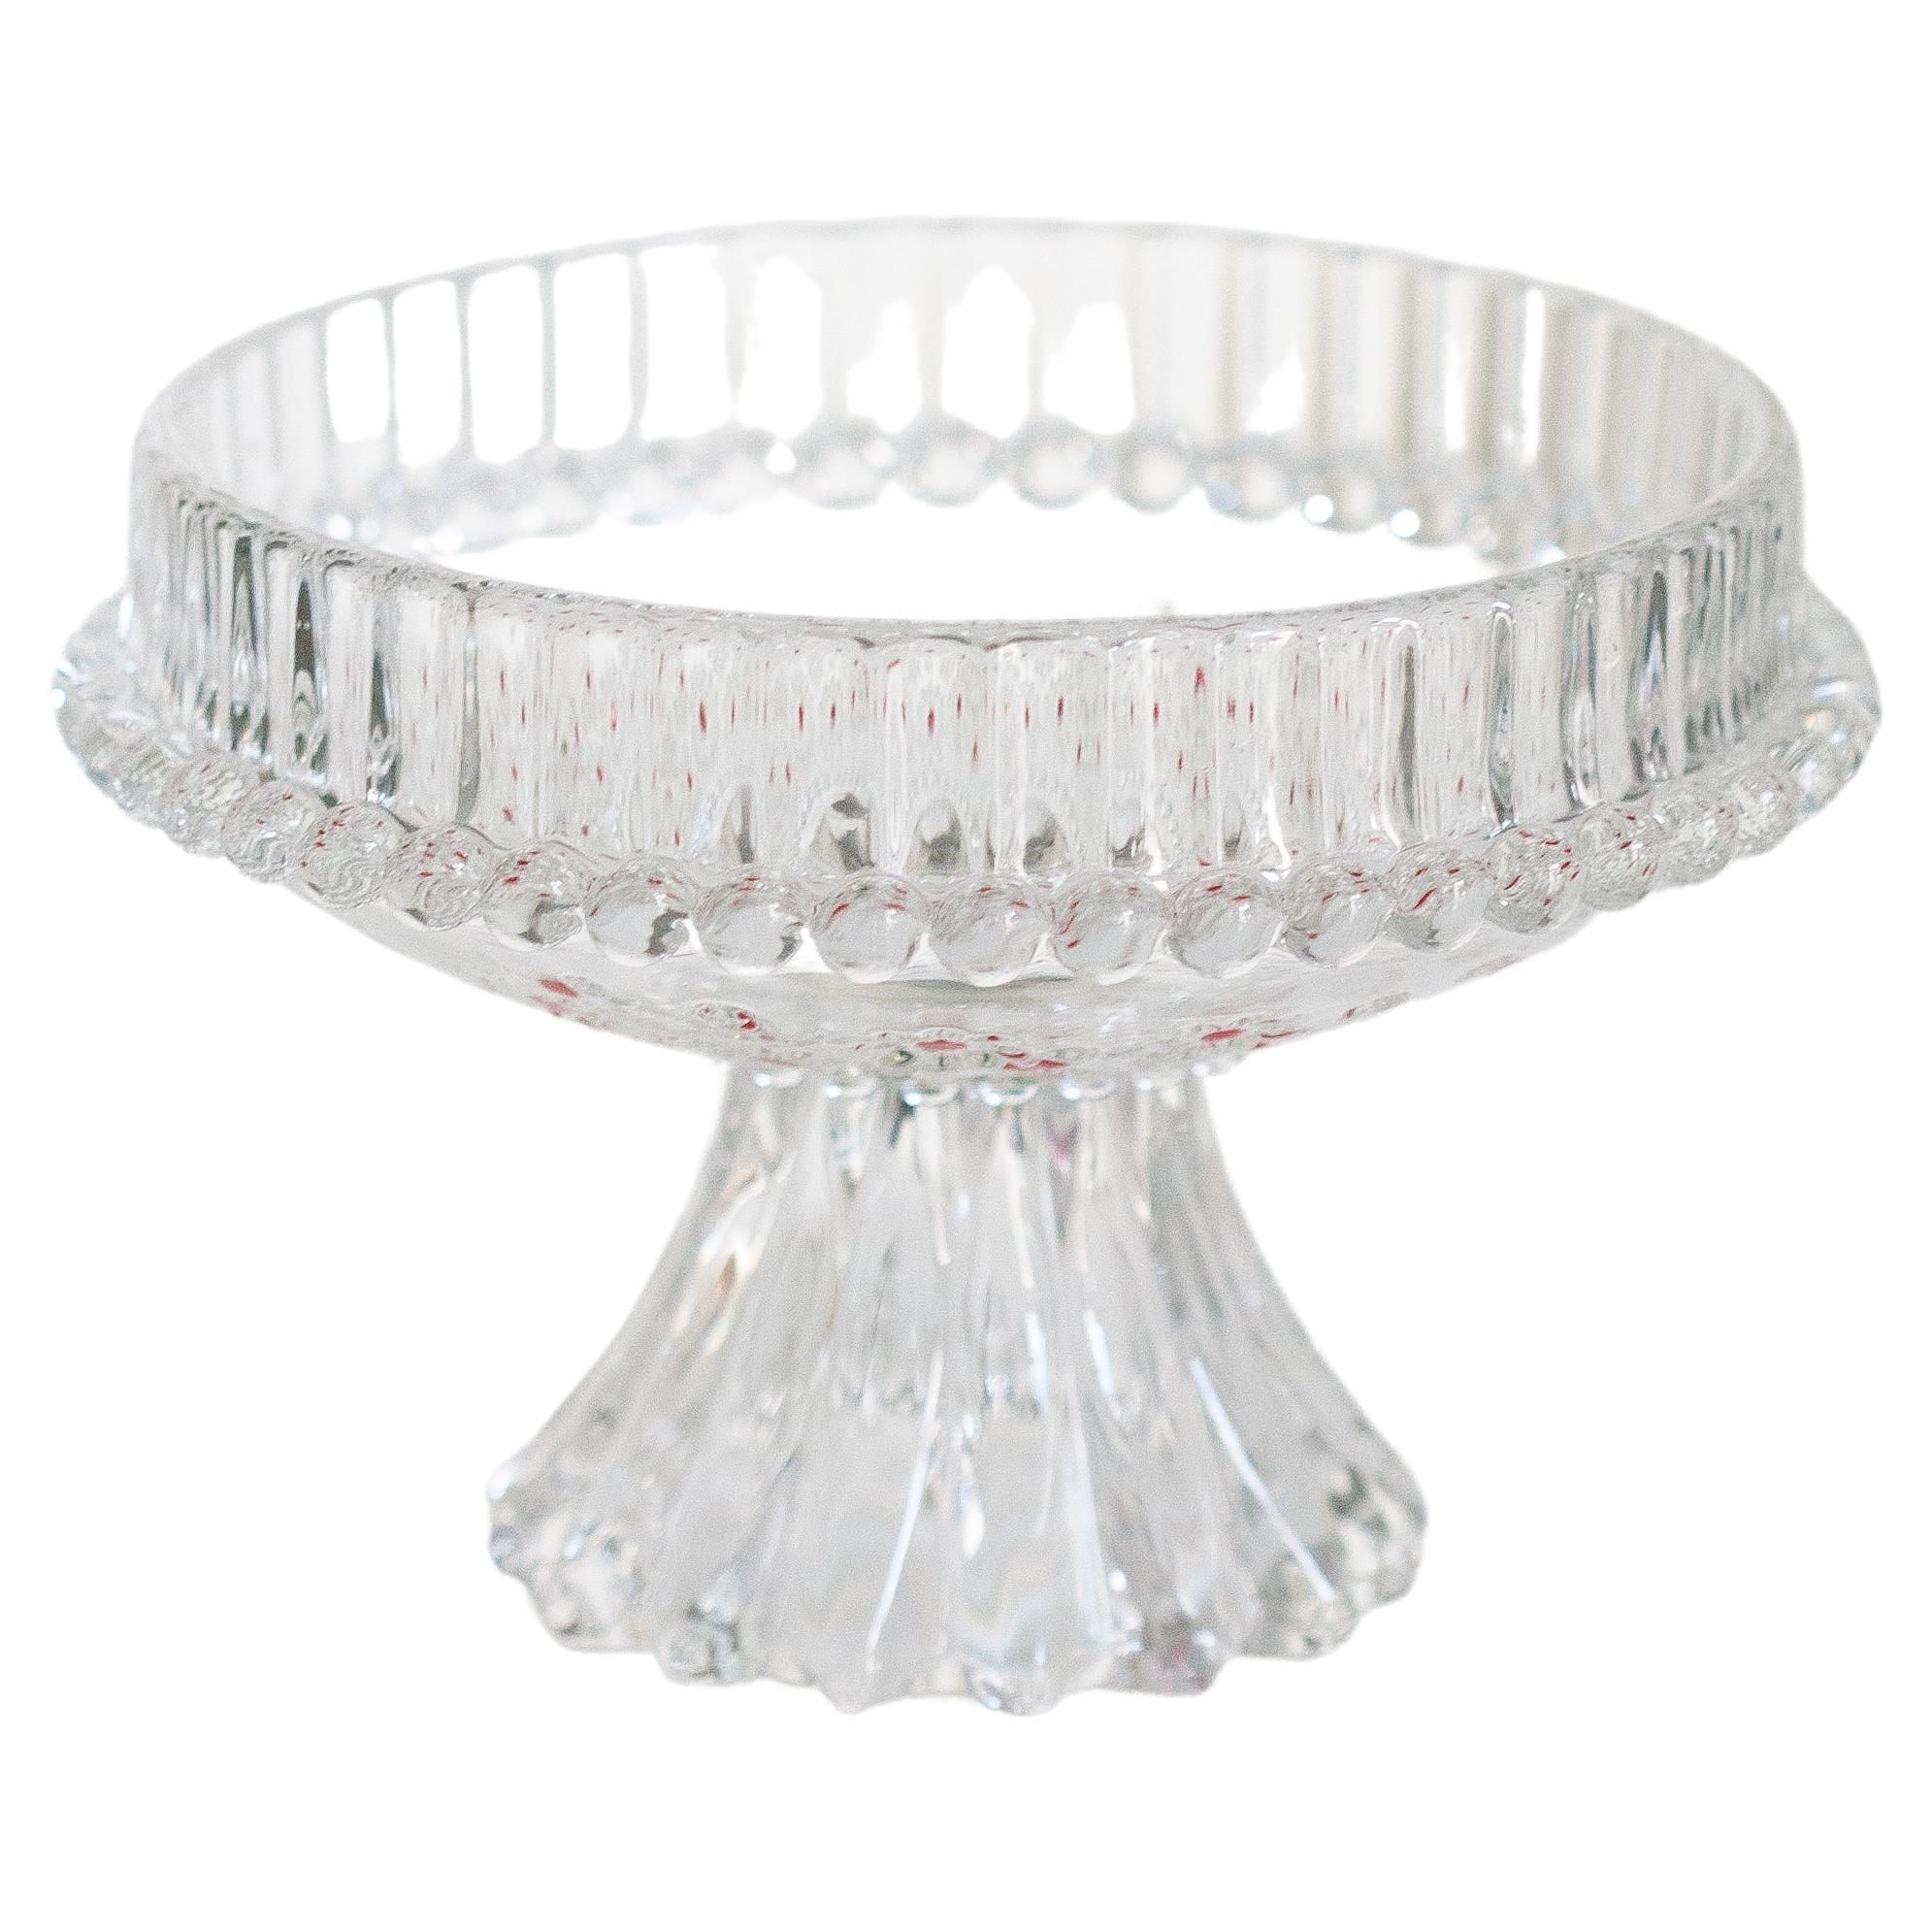 Vintage Transparent Decorative Crystal Glass Plate, Italy, 1960s